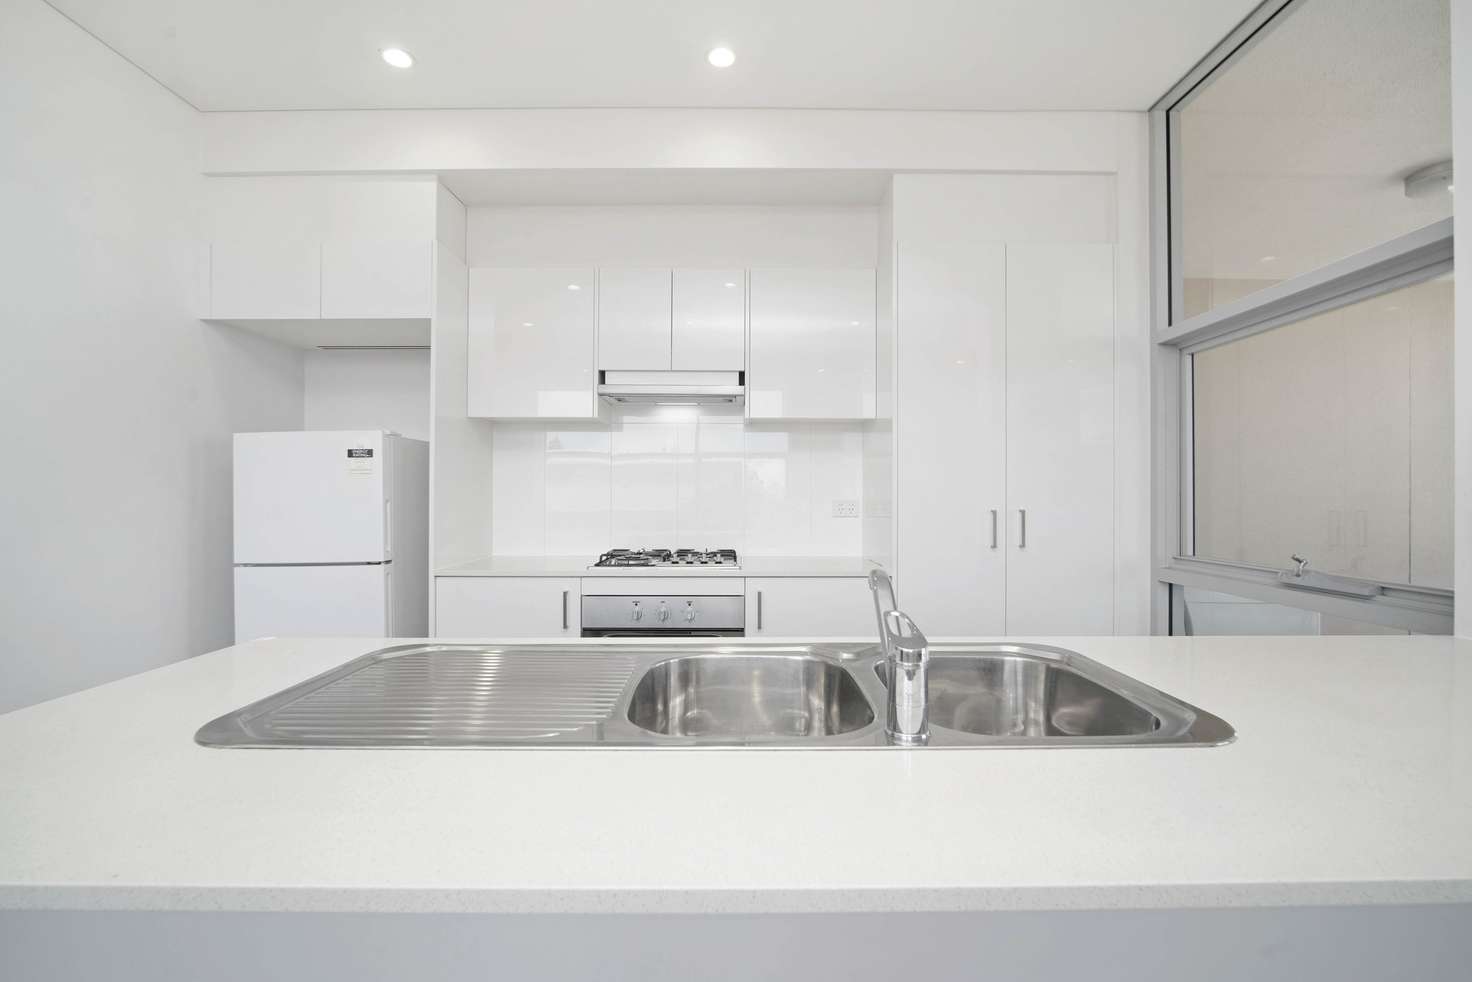 Main view of Homely apartment listing, 125/30 Gladstone Avenue, Wollongong NSW 2500